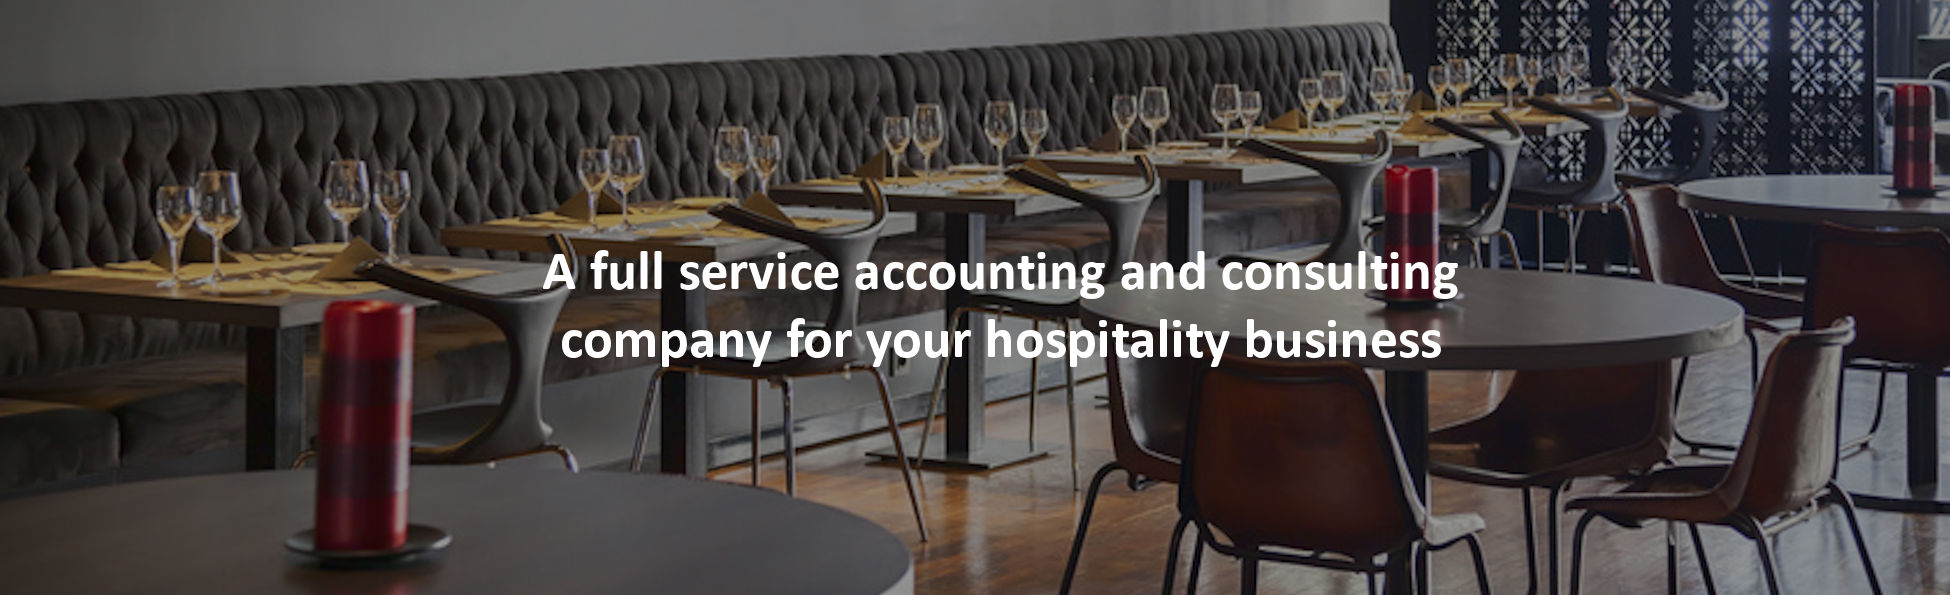 Restaurant Accounting and Financial Management Services, by Strictly Restaurants